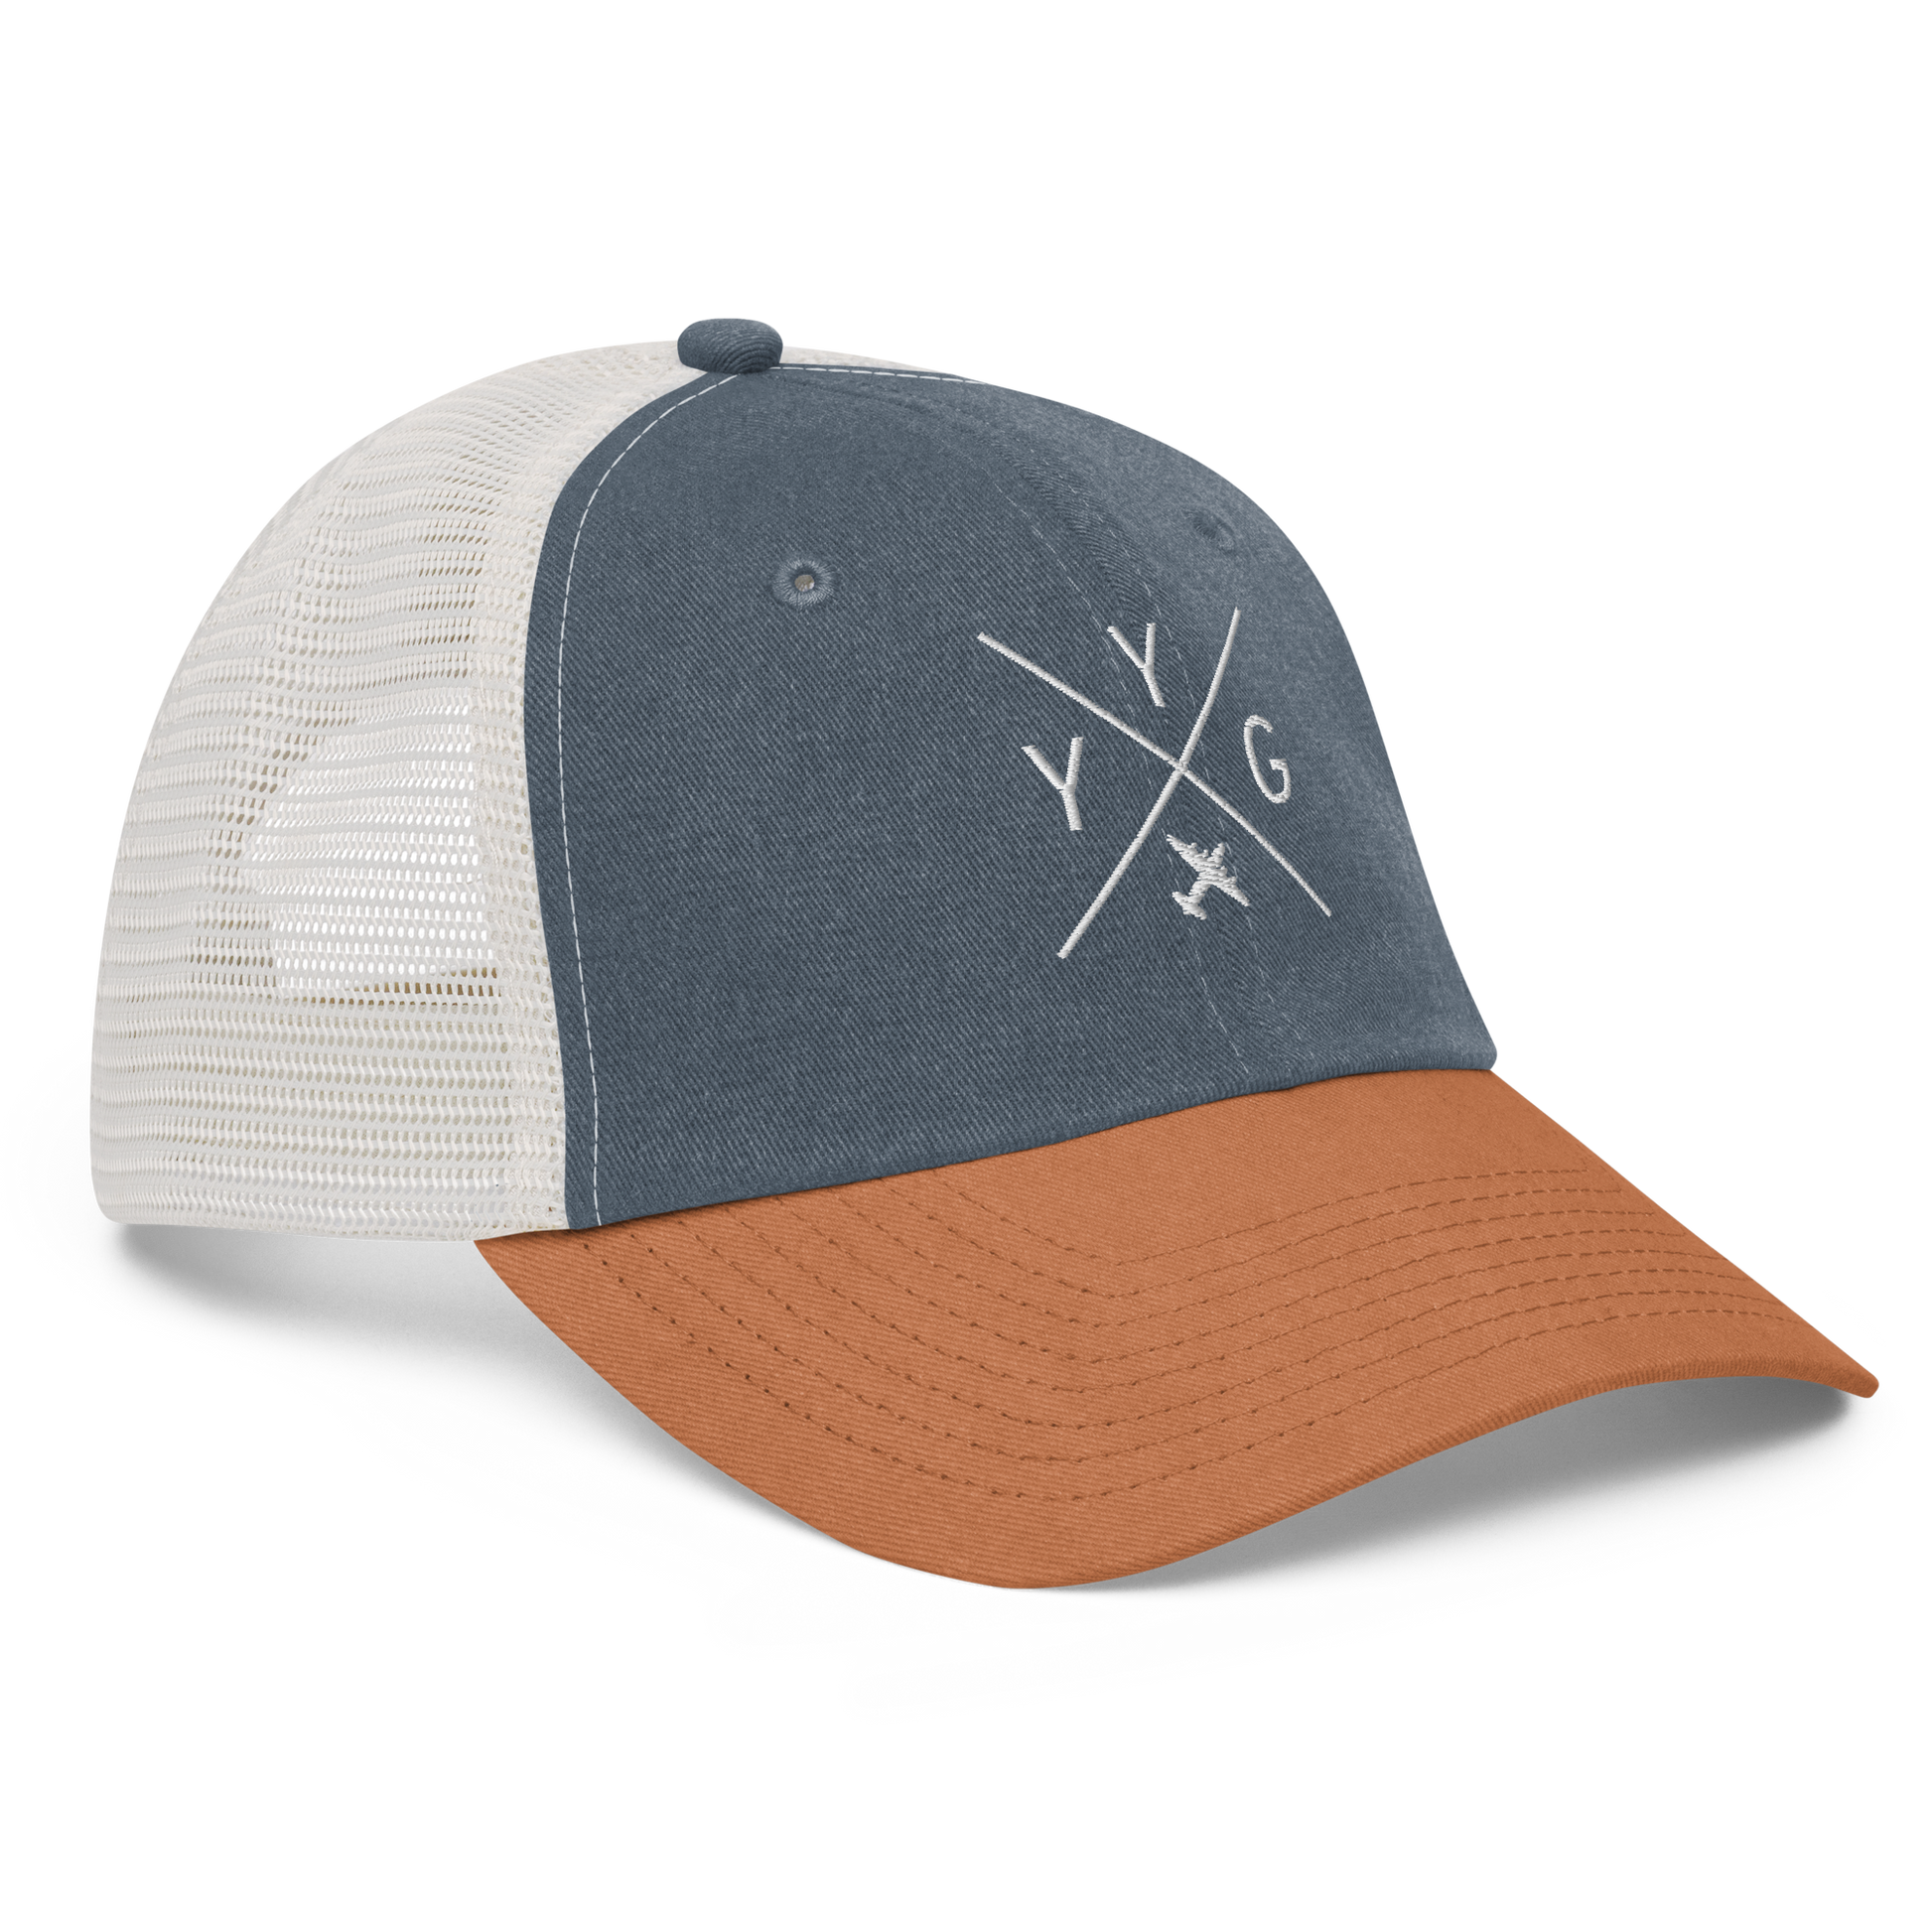 YHM Designs - YYG Charlottetown Pigment-Dyed Trucker Cap - Crossed-X Design with Airport Code and Vintage Propliner - White Embroidery - Image 16